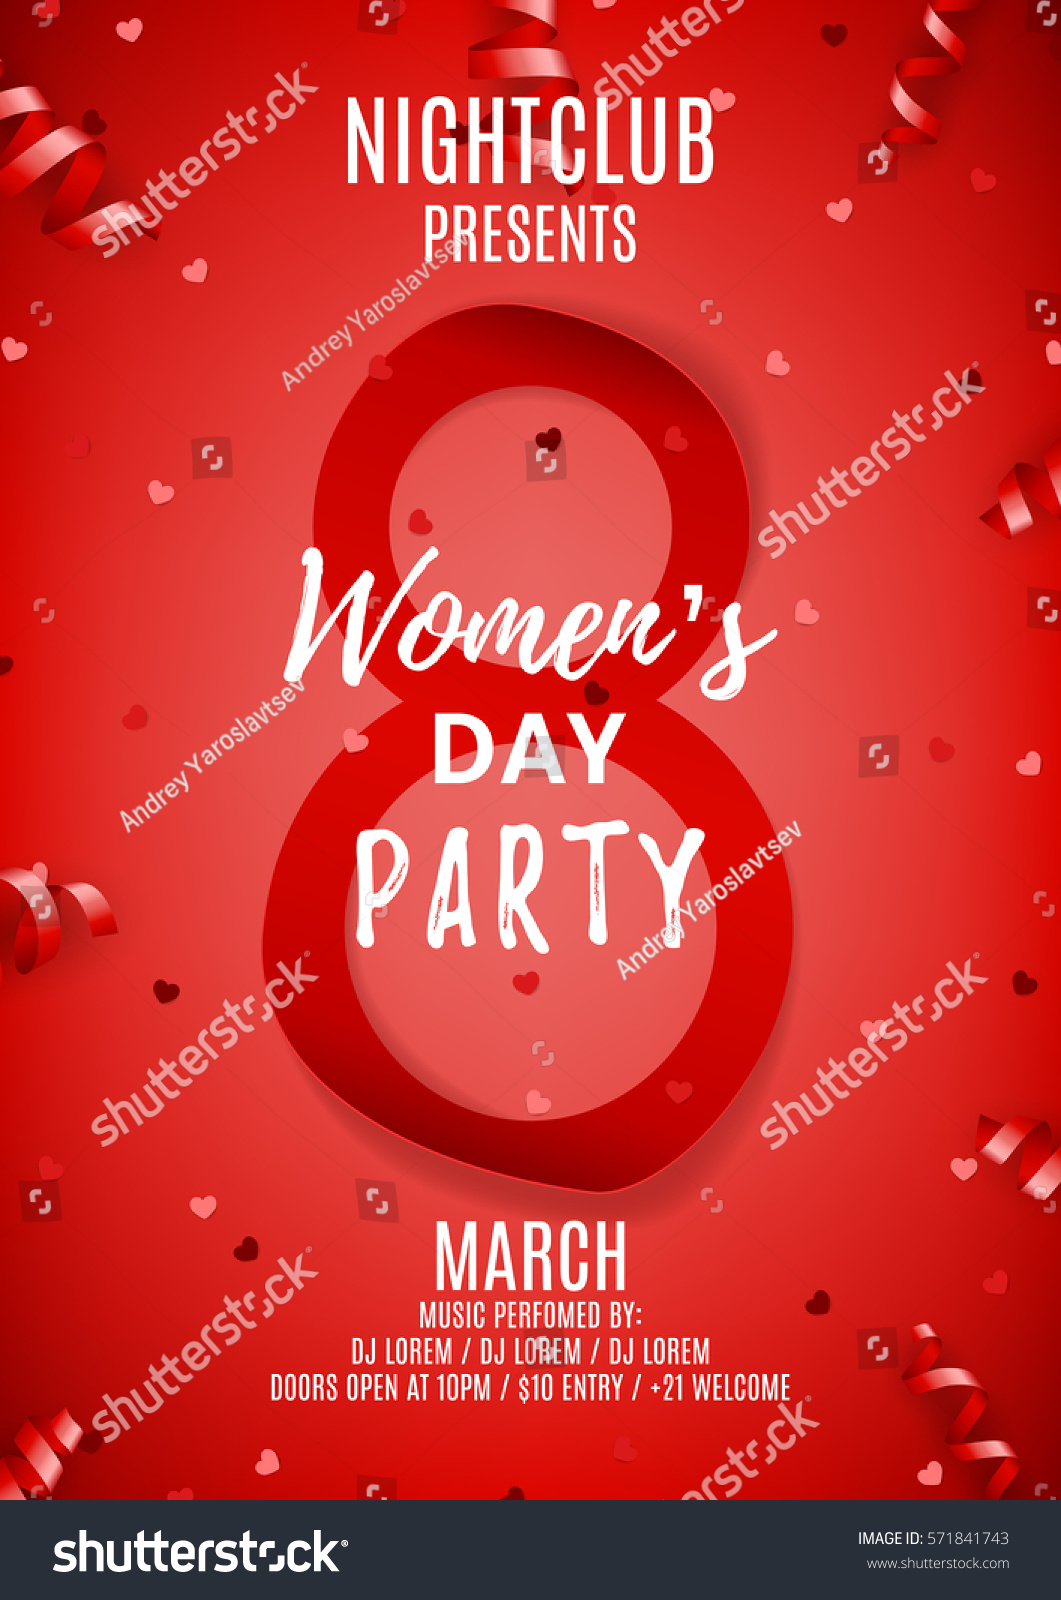 Red poster for Women's Day party. Top view on paper eight, confetti and serpentine. Vector illustration. Invitation to nightclub. #571841743